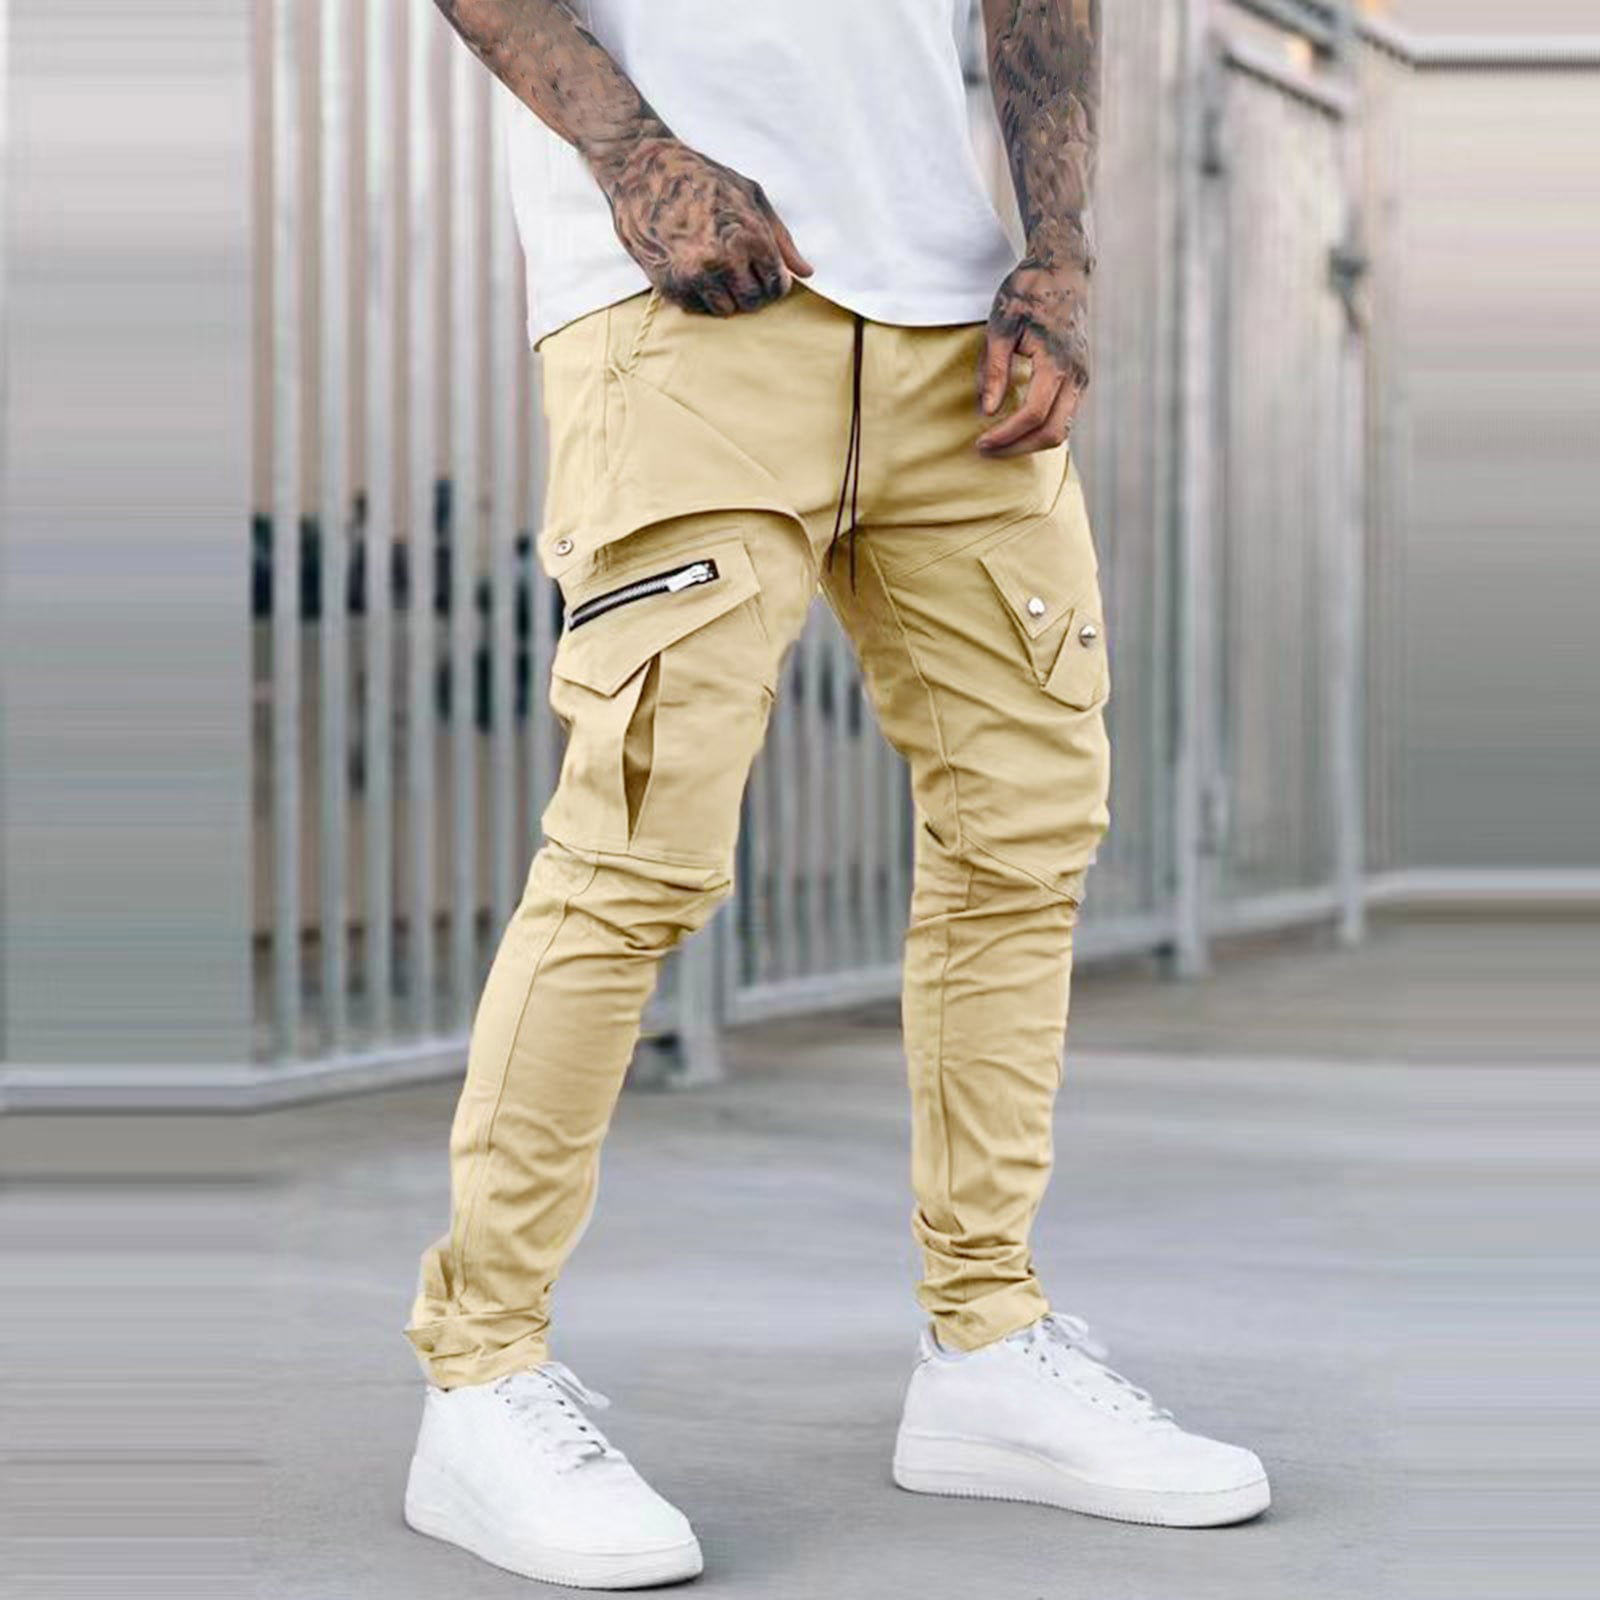 Relaxed Fit Twill Pull-on Pants - Khaki green - Men | H&M US